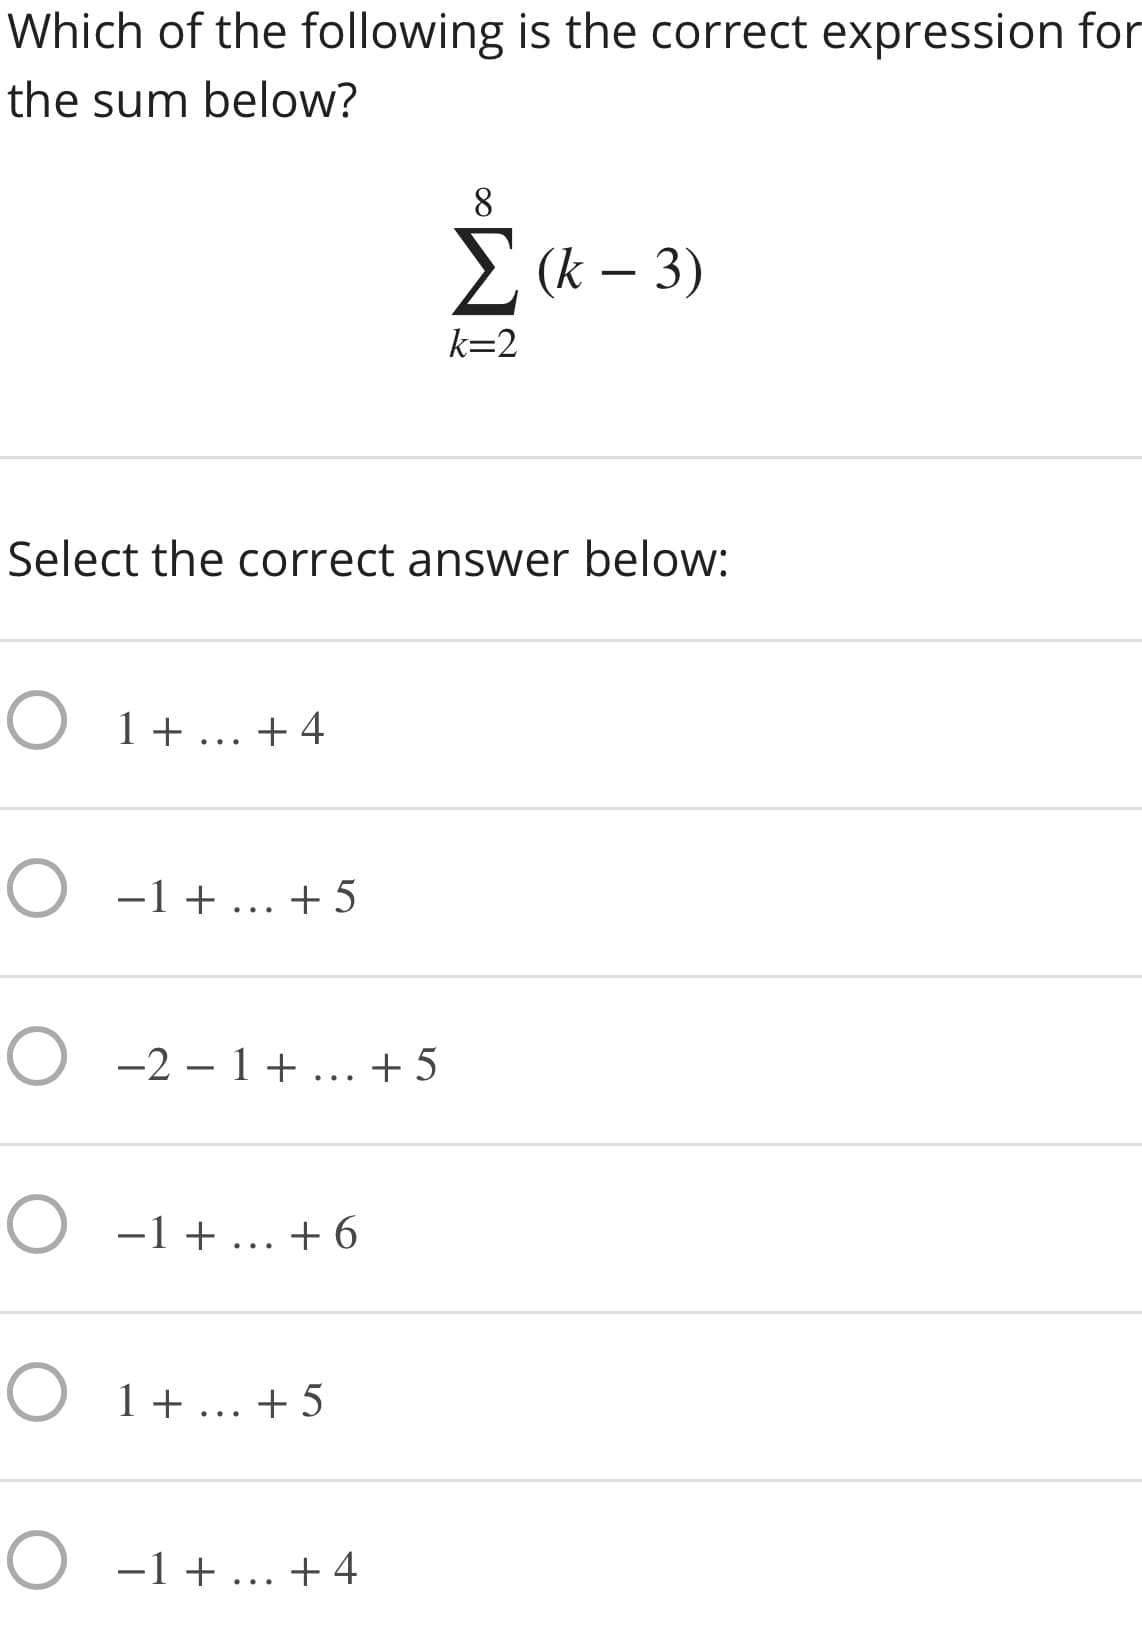 Which of the following is the correct expression for
the sum below?
8.
E (k – 3)
k=2
Select the correct answer below:
O 1+... +4
O -1 + ... +5
O -2 – 1 + ... + 5
O -1 + ... +6
O 1+ ... + 5
O -1 + ... + 4
